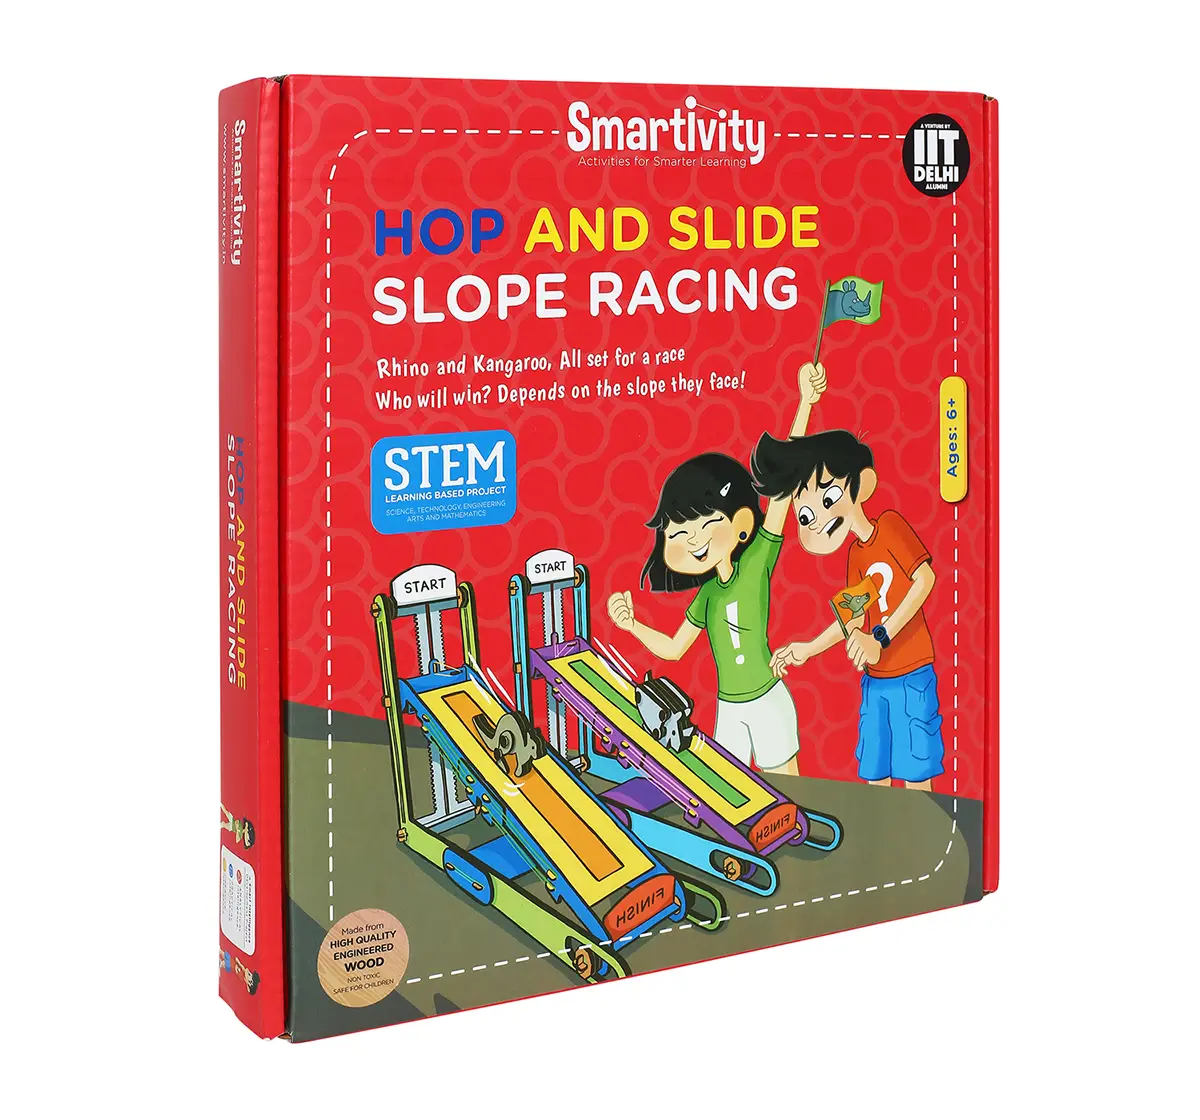 Smartivity Hop and Slide Slope Racing:  Stem, Learning, Educational and Construction Activity Toy Gift for Kids age 6Y+  (Multi-Color)